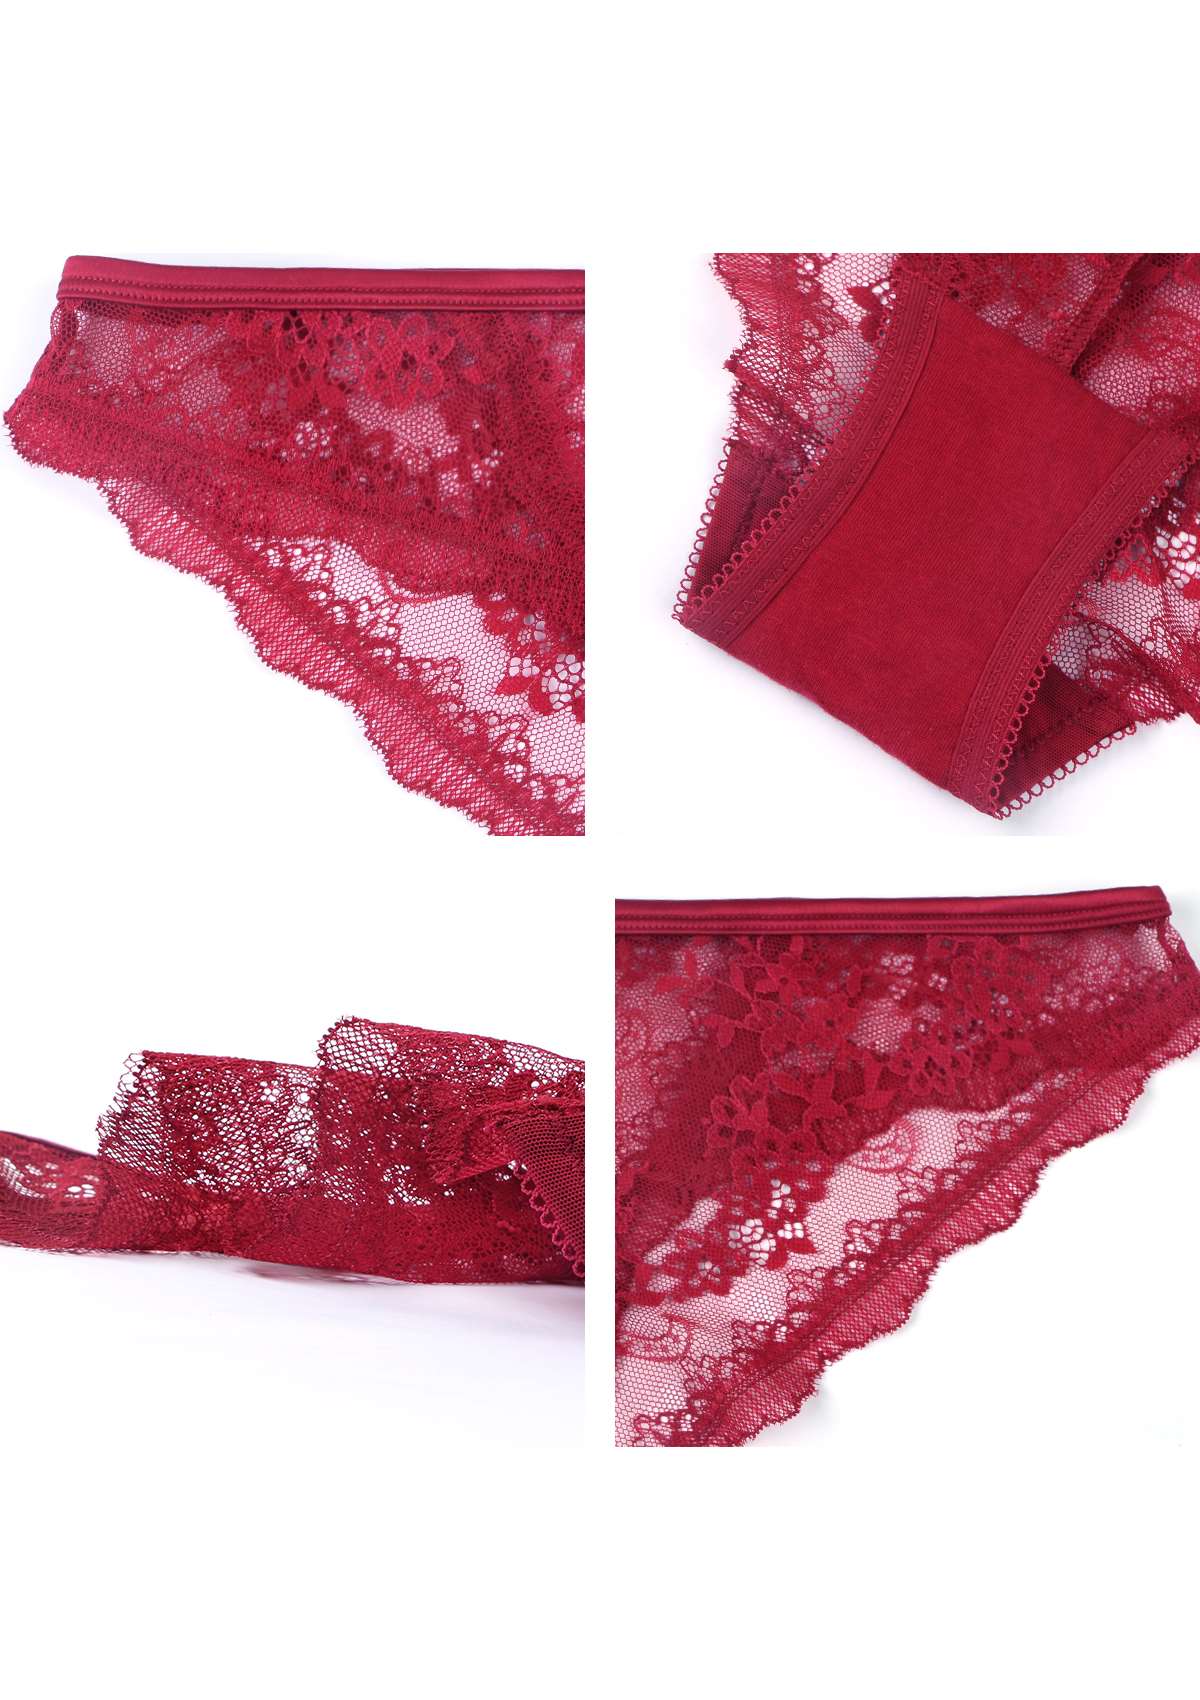 HSIA Floral Bridal Lace Back Sheer Sophisticated Cheeky Underwear  - Burgundy / XXL